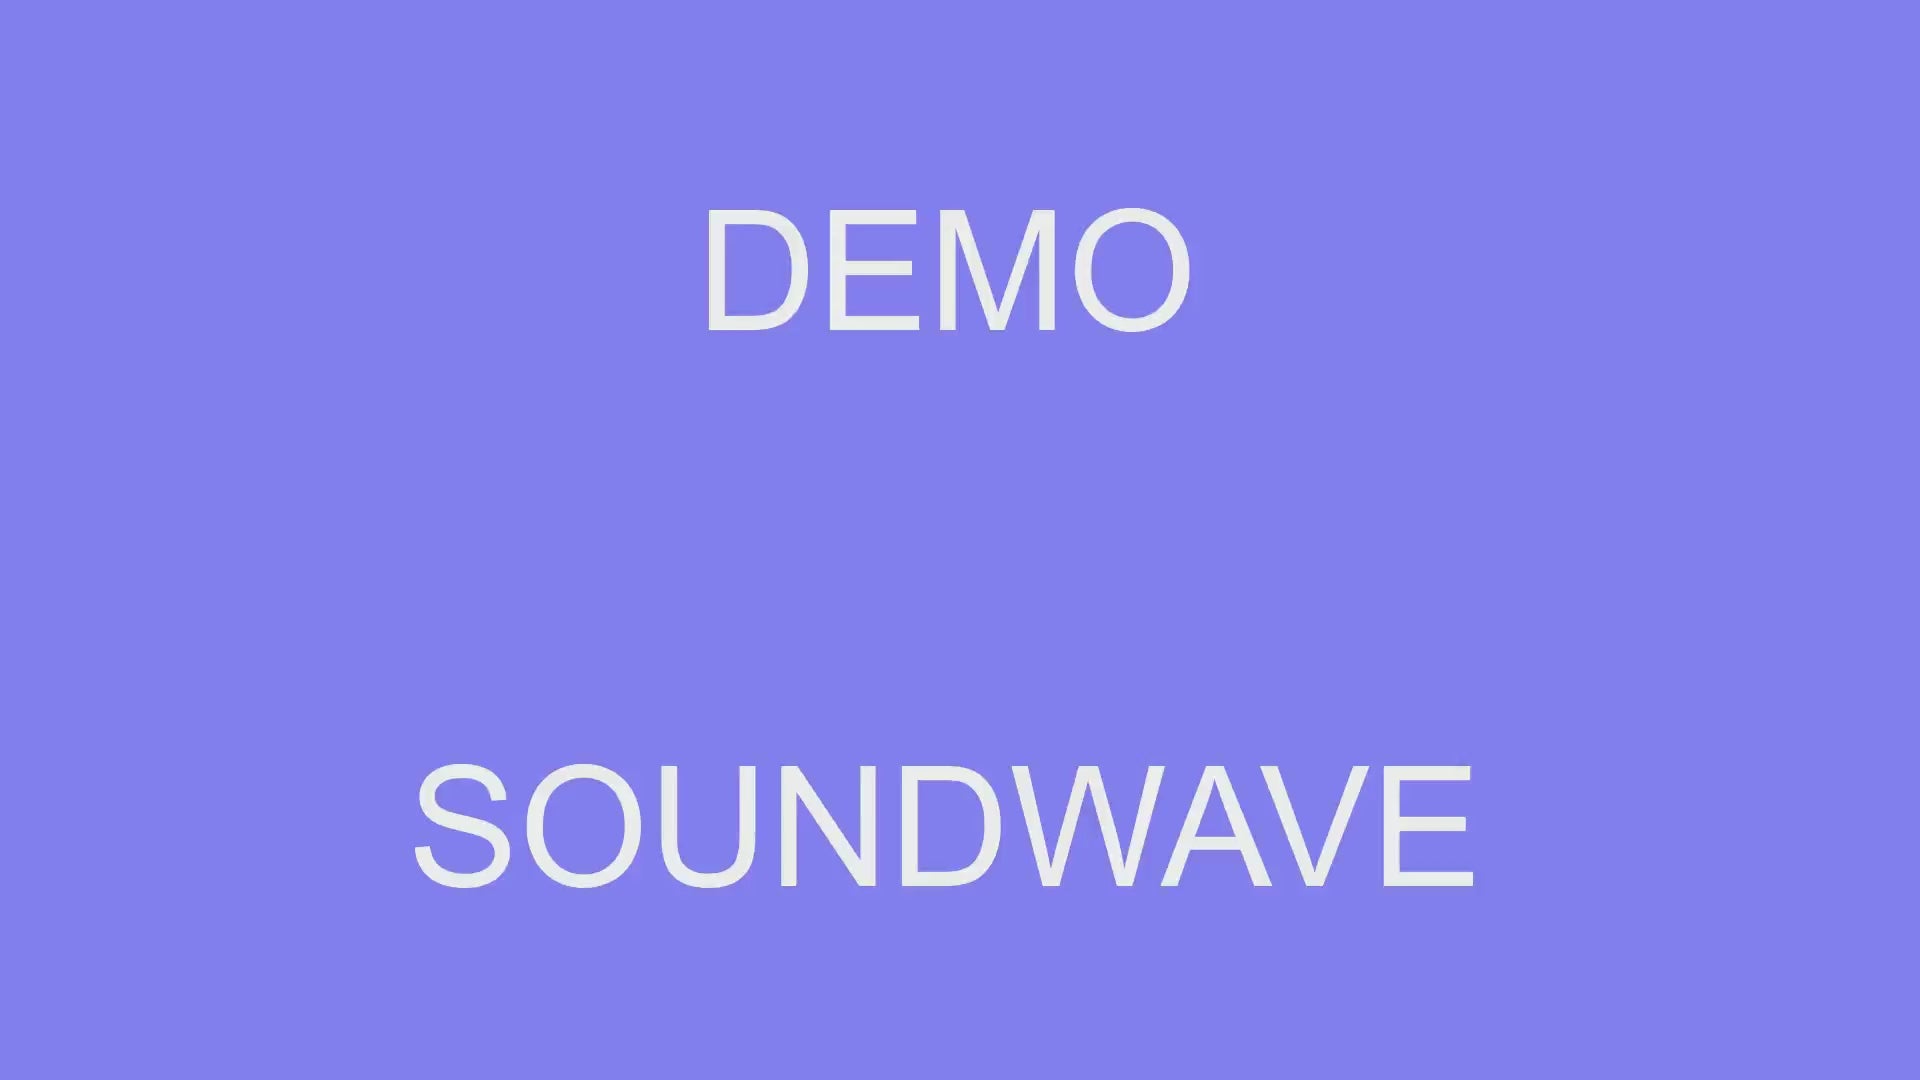 Voice soundwave playing